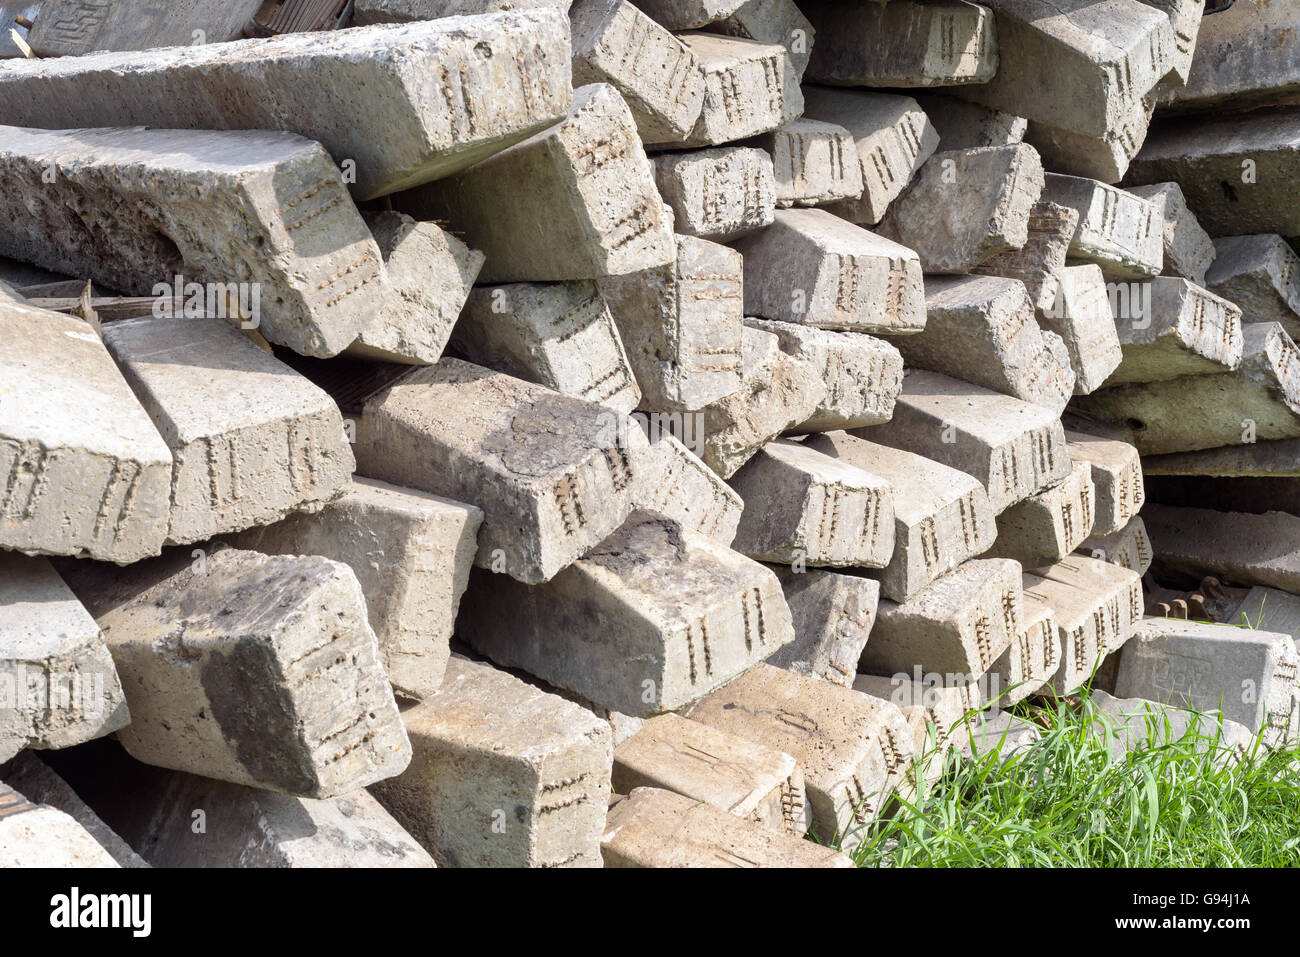 Piles of concrete reinforcement pillars used for foundations in the construction and building industry Stock Photo